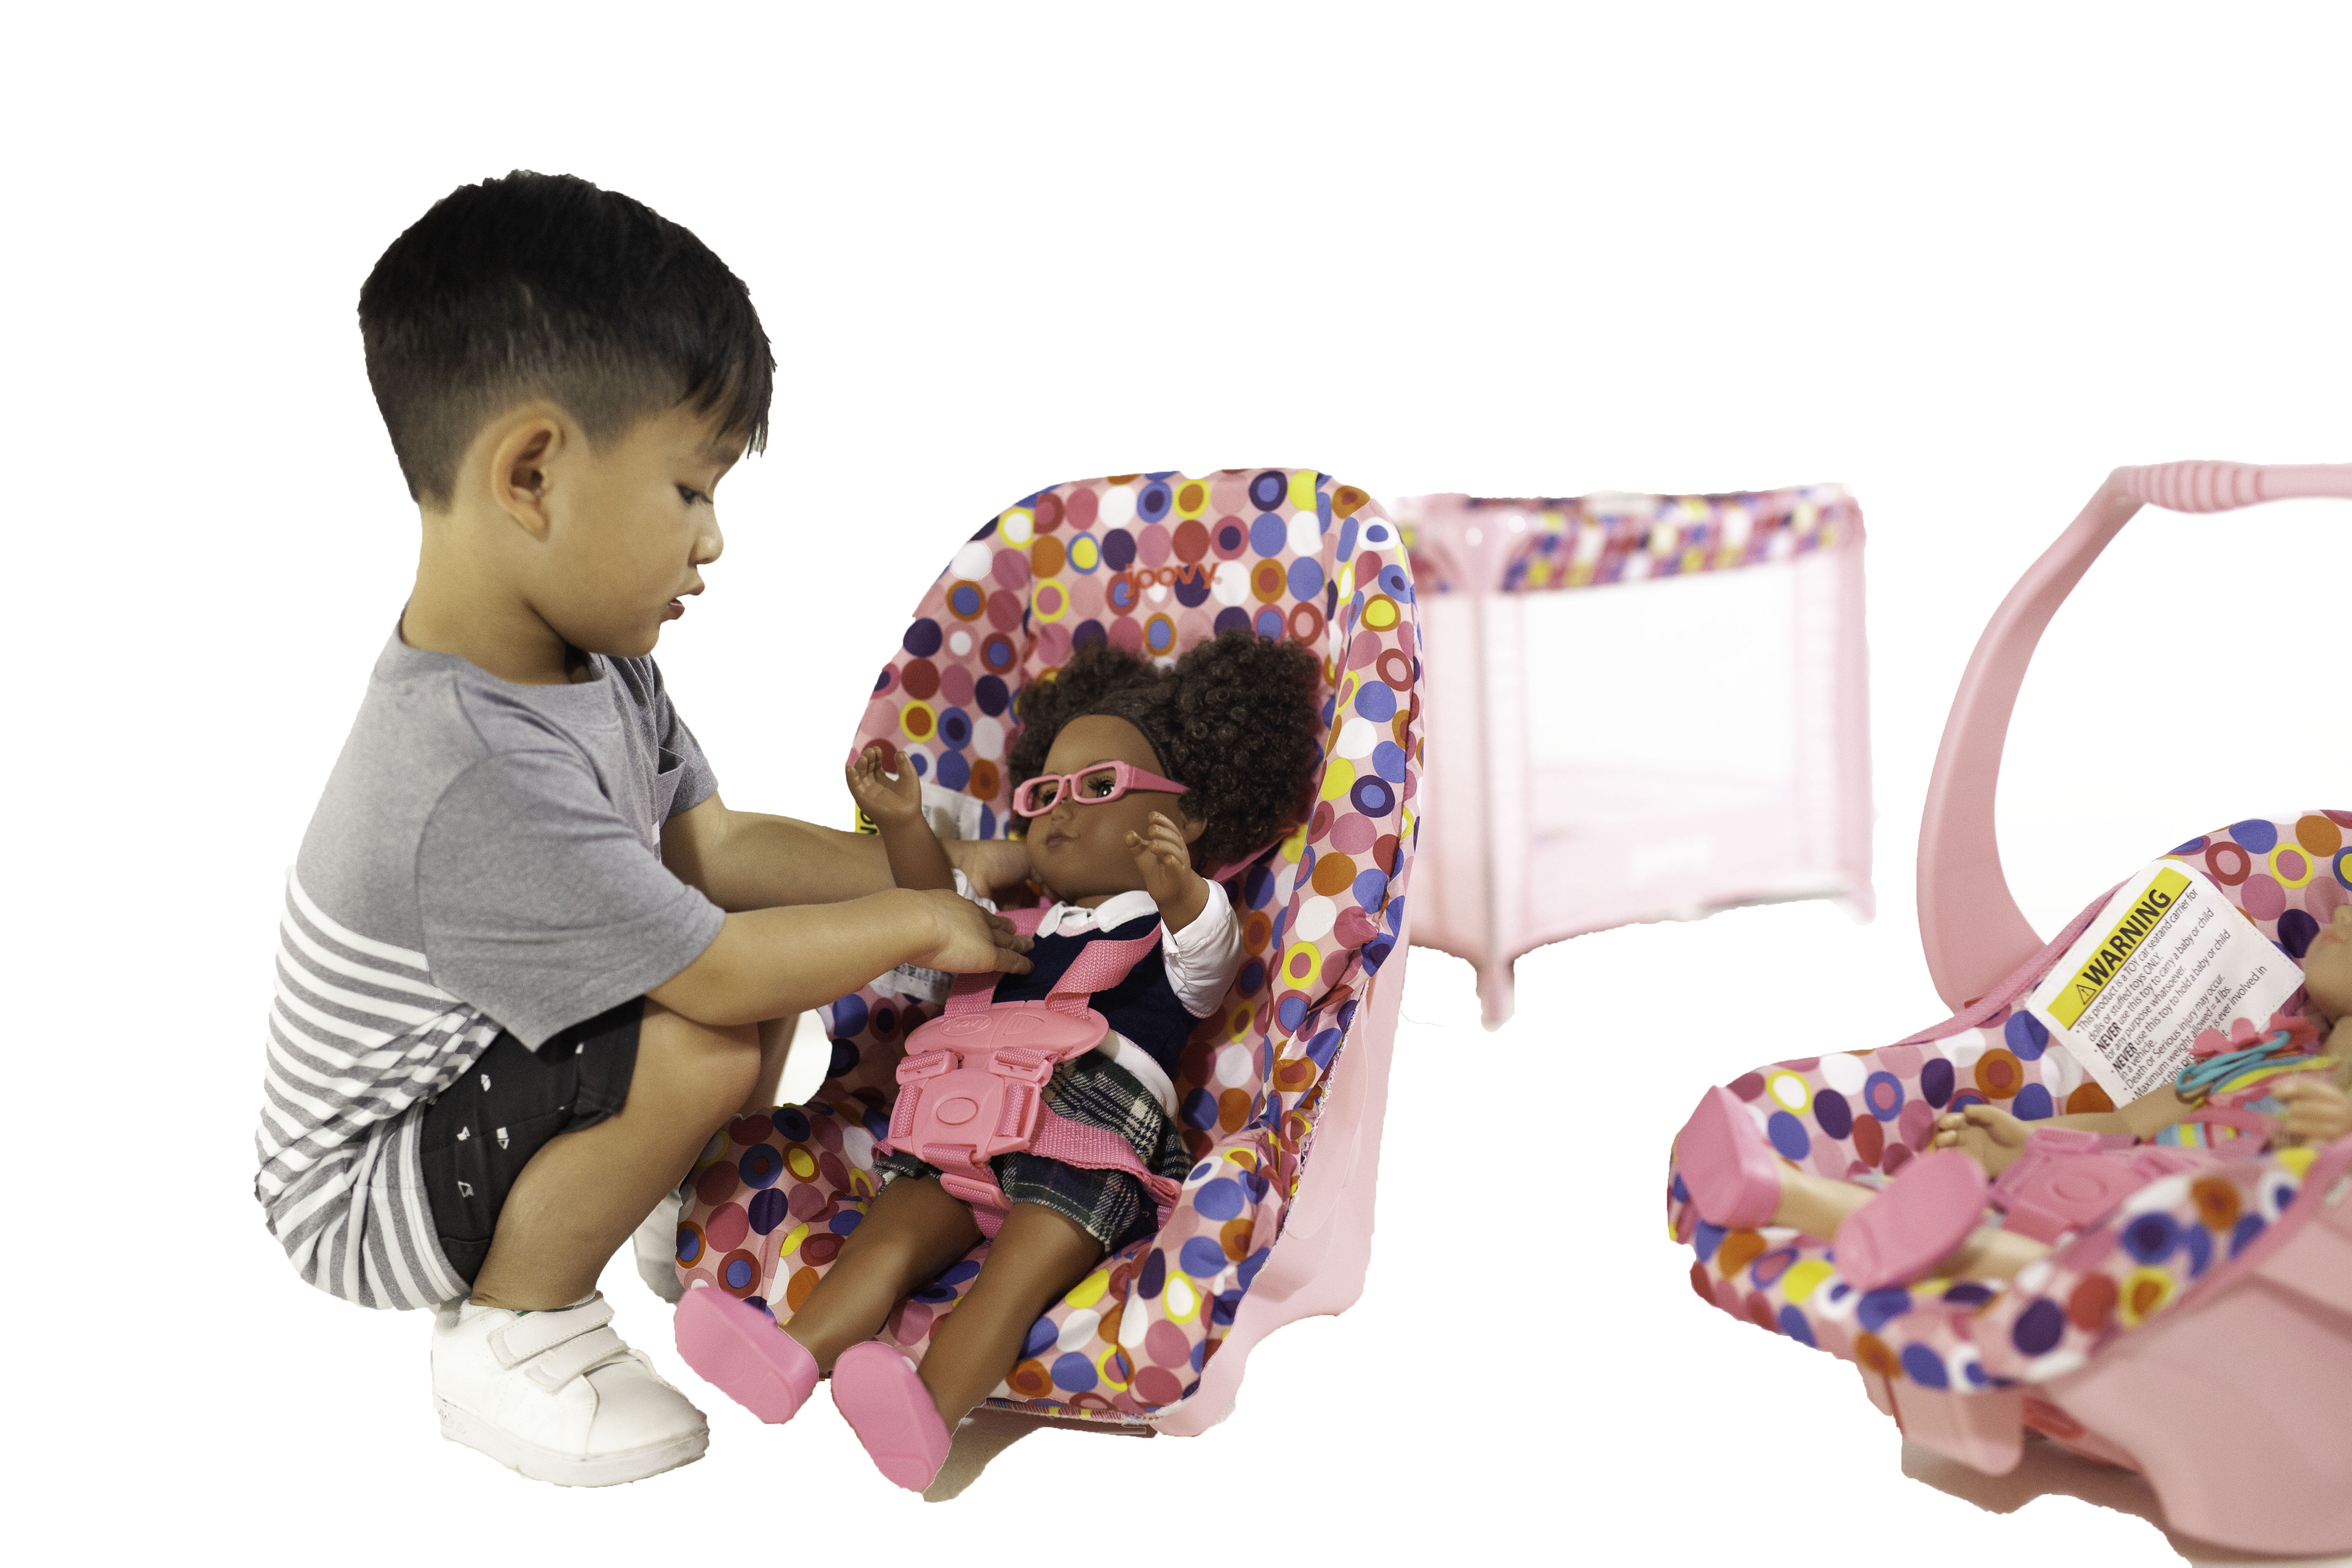 toy car seats for baby dolls